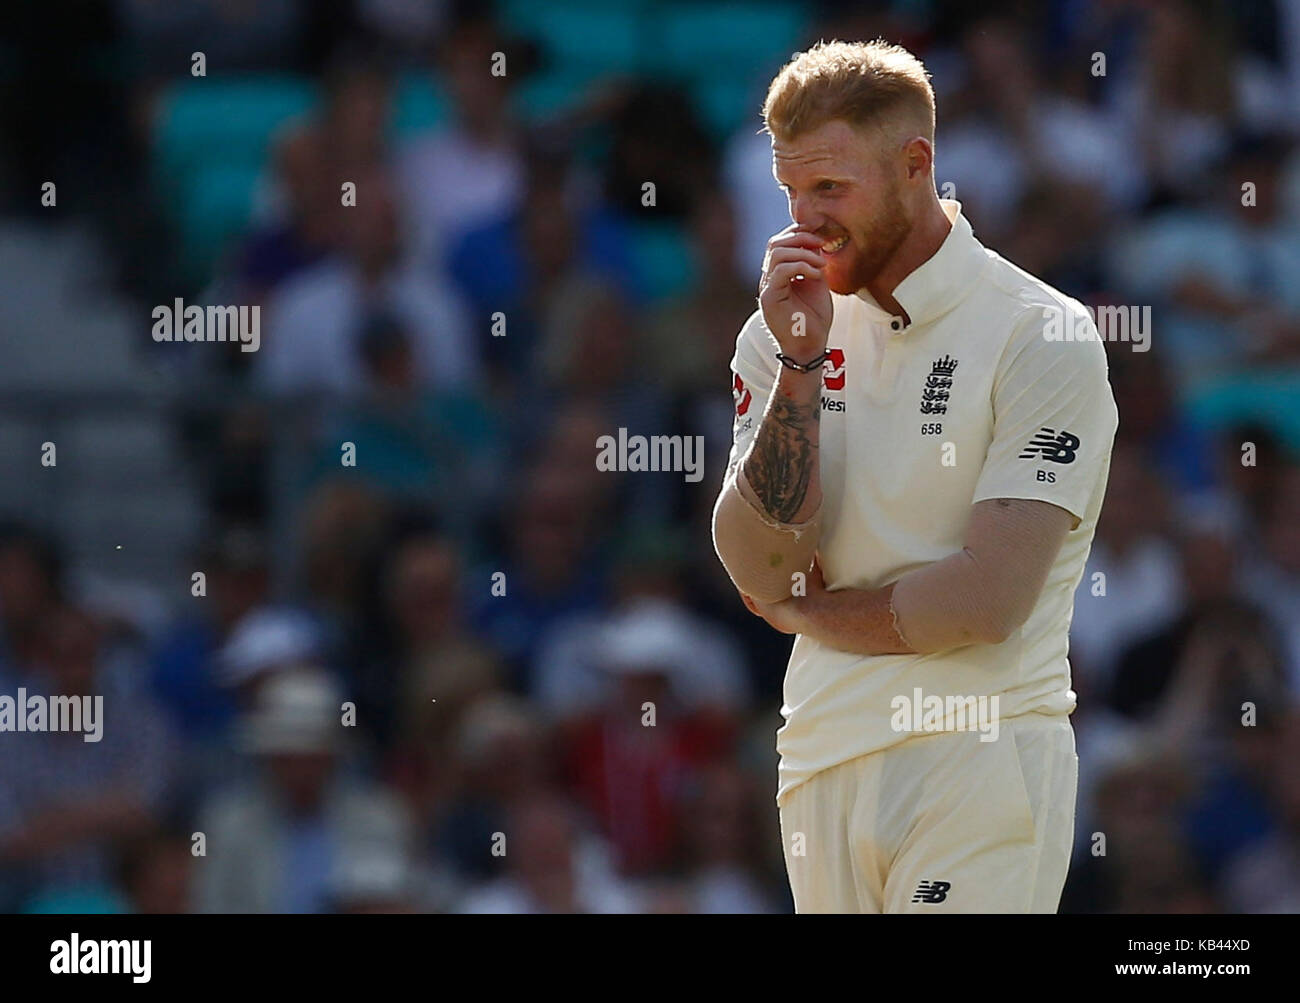 Ben Stokes of England during day four of the third Investec Test match between England and South Africa at The Oval in London. 30 Jul 2017 Stock Photo